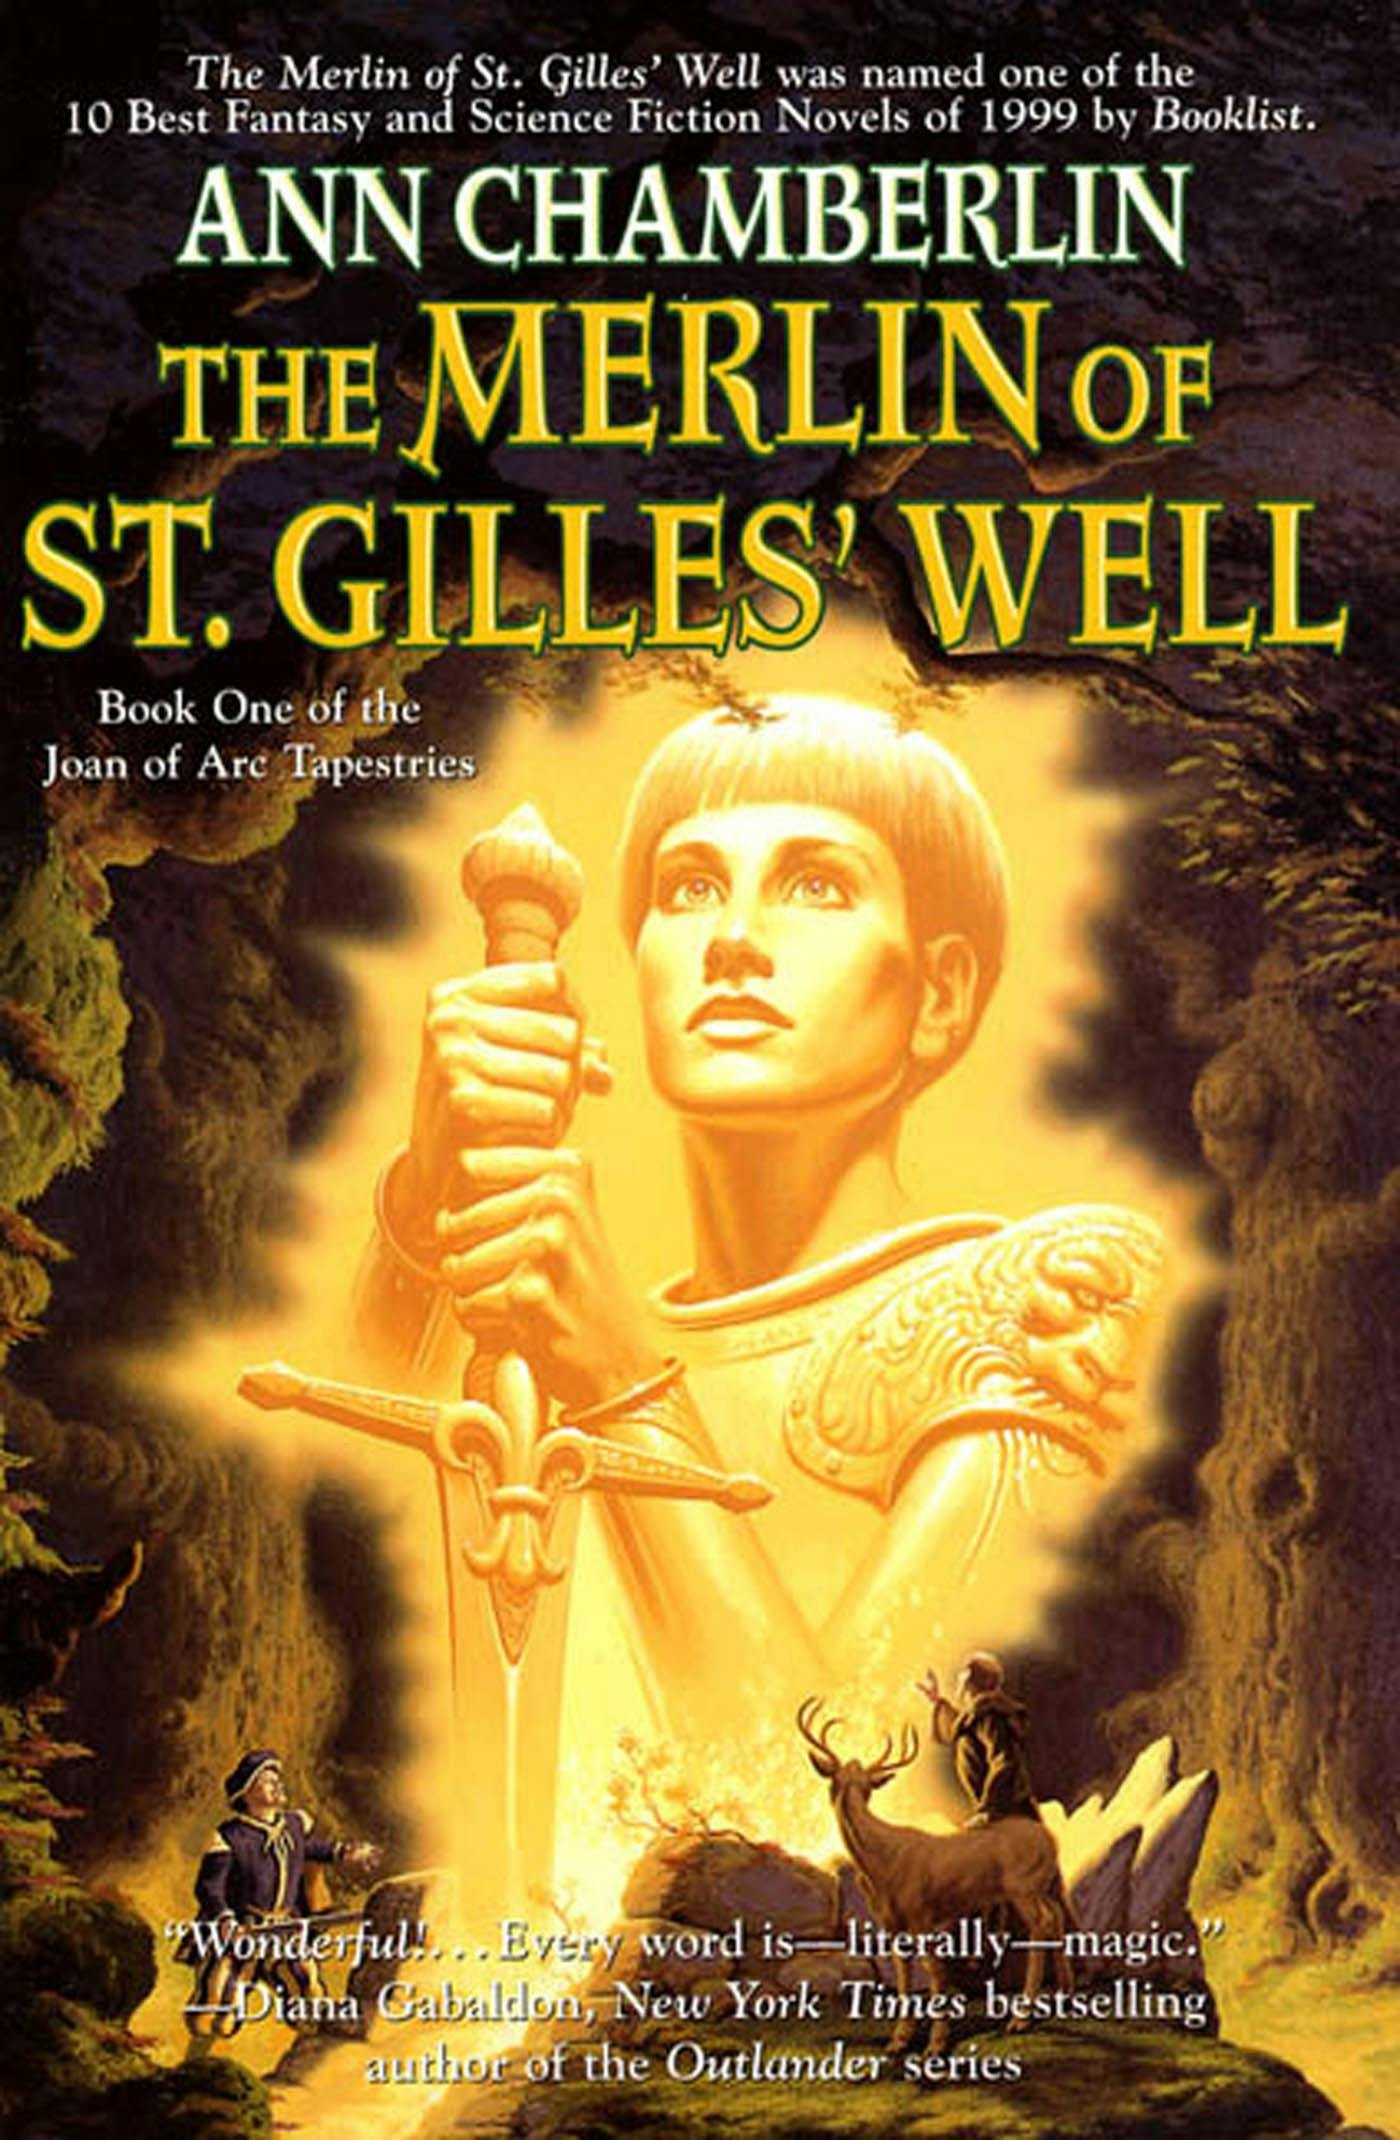 Image of The Merlin of St. Gilles' Well